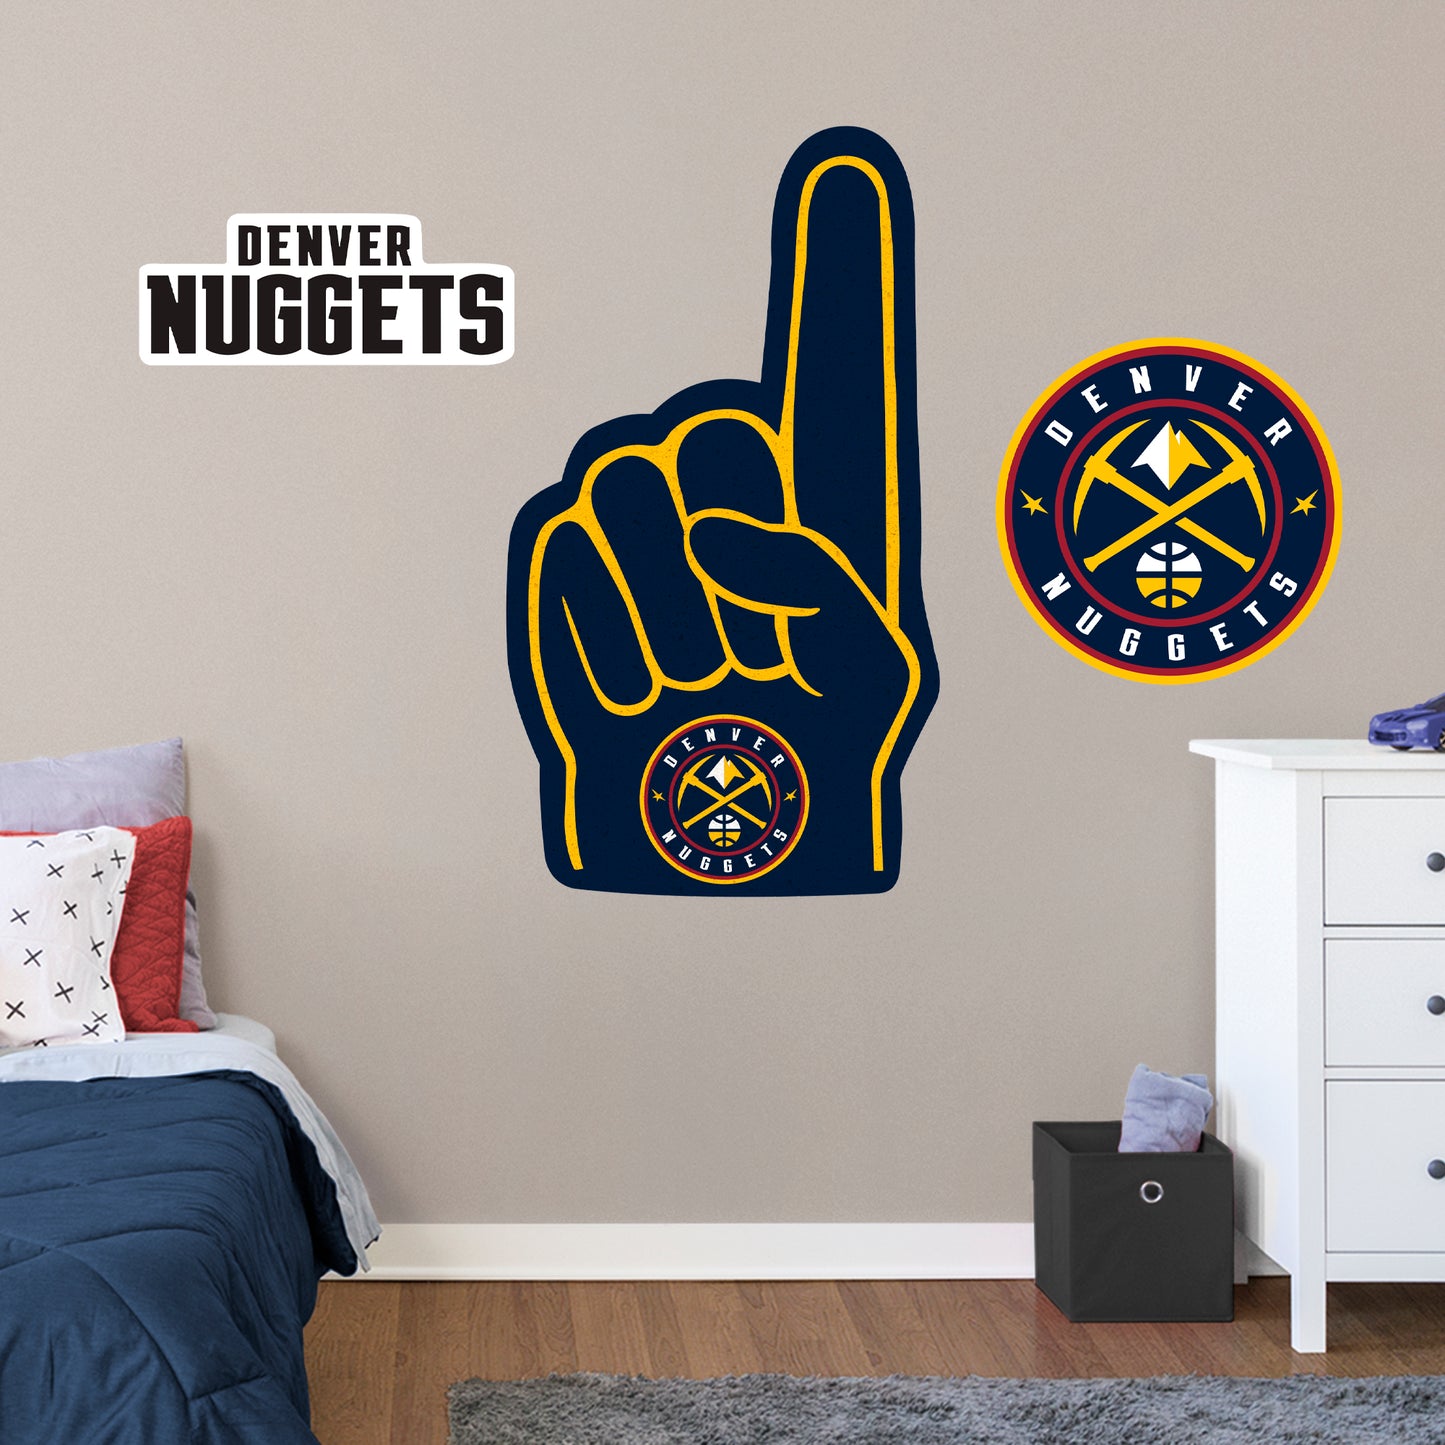 Denver Nuggets: Foam Finger - Officially Licensed NBA Removable Adhesive Decal